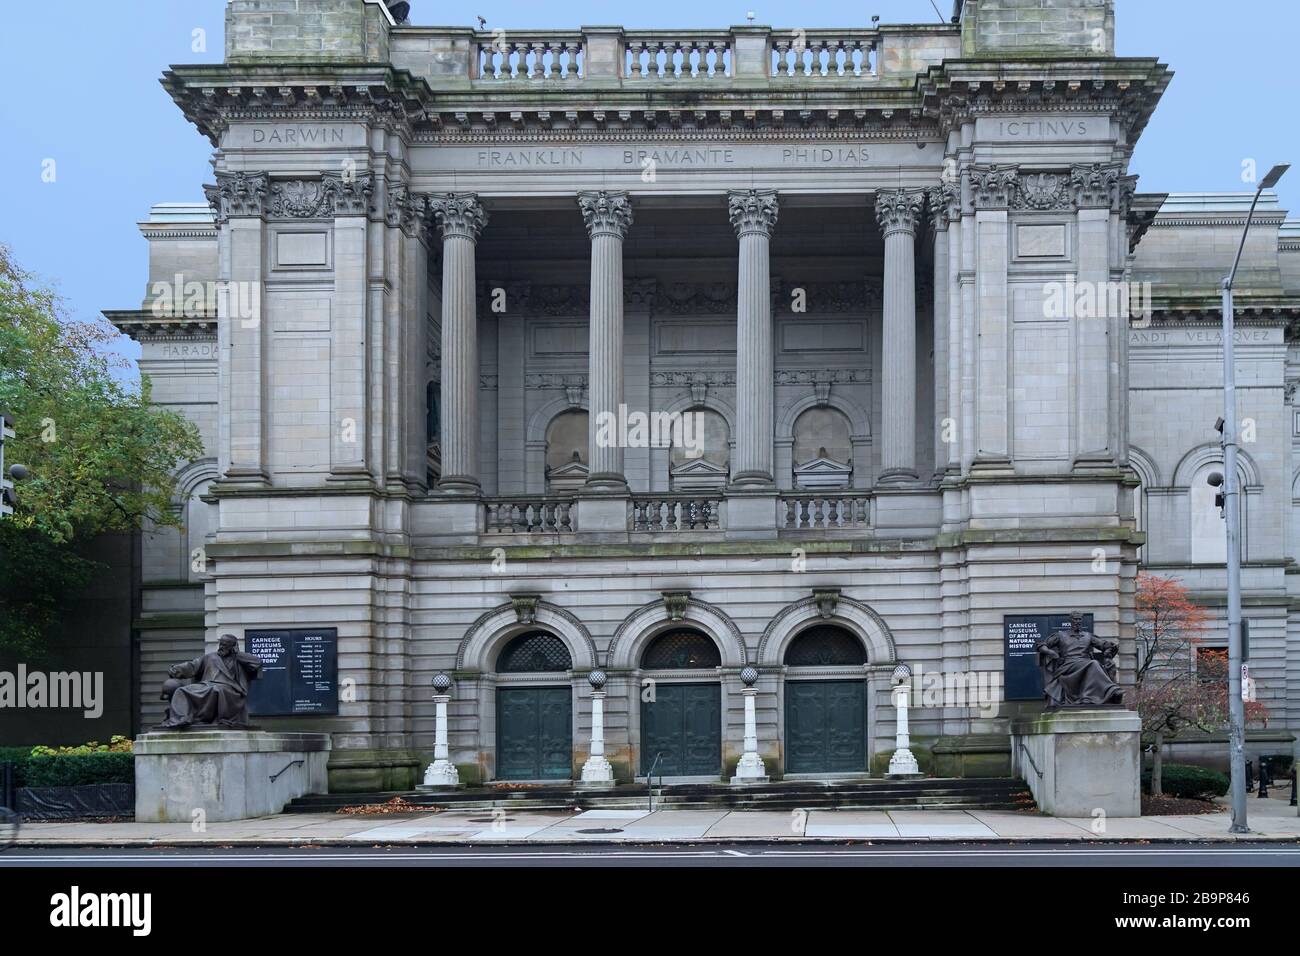 PITTSBURGH - NOVEMBER 2019:  The classical style exterior of the Carnegie Museum is inscribed with the names of famous scientists and artists. Stock Photo